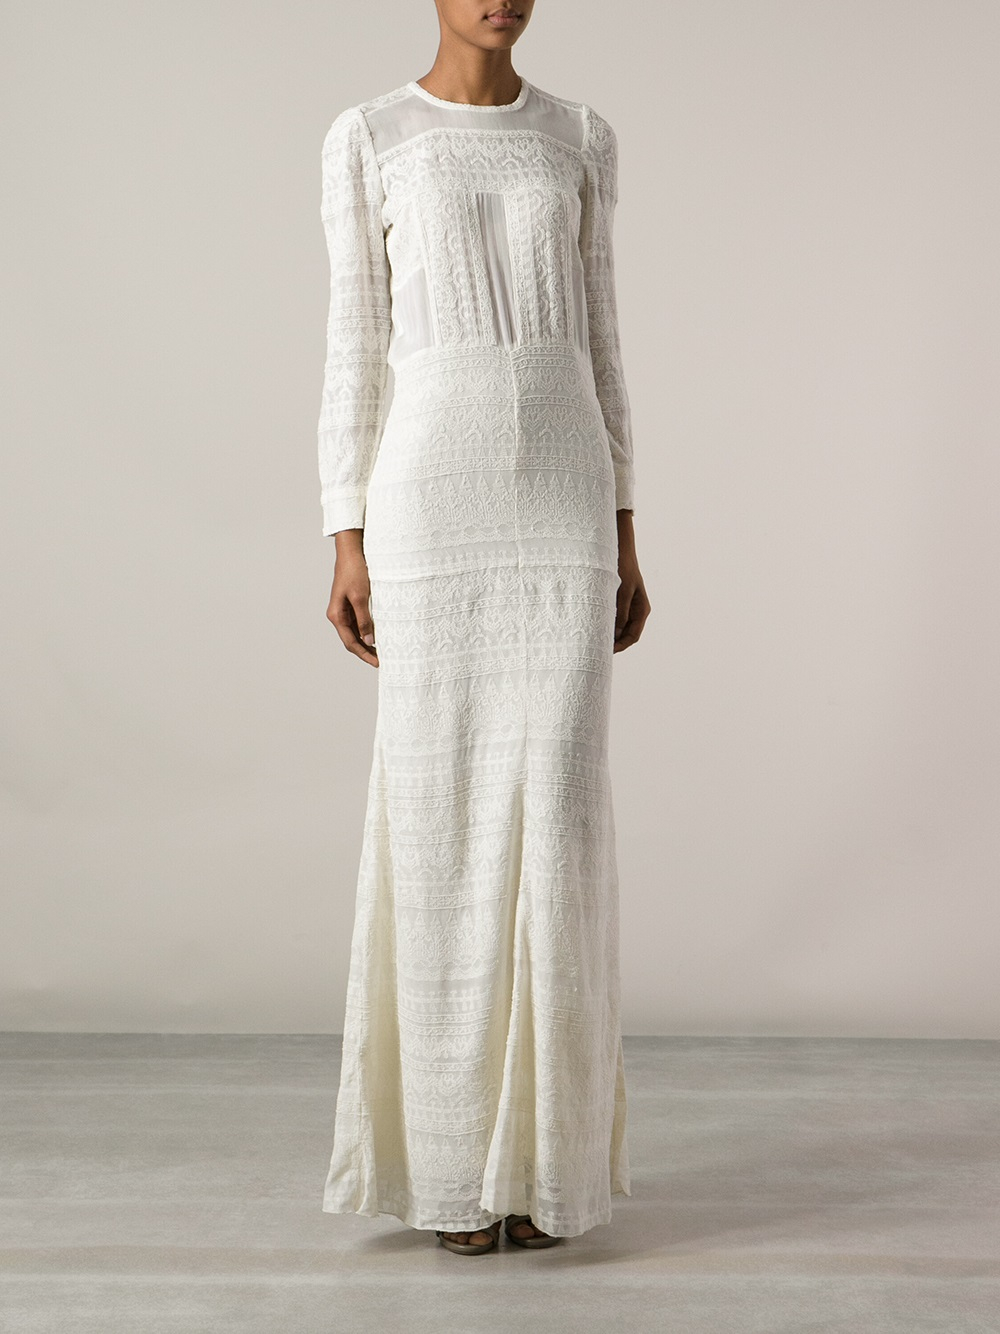 Isabel Marant Lace Dress in White | Lyst